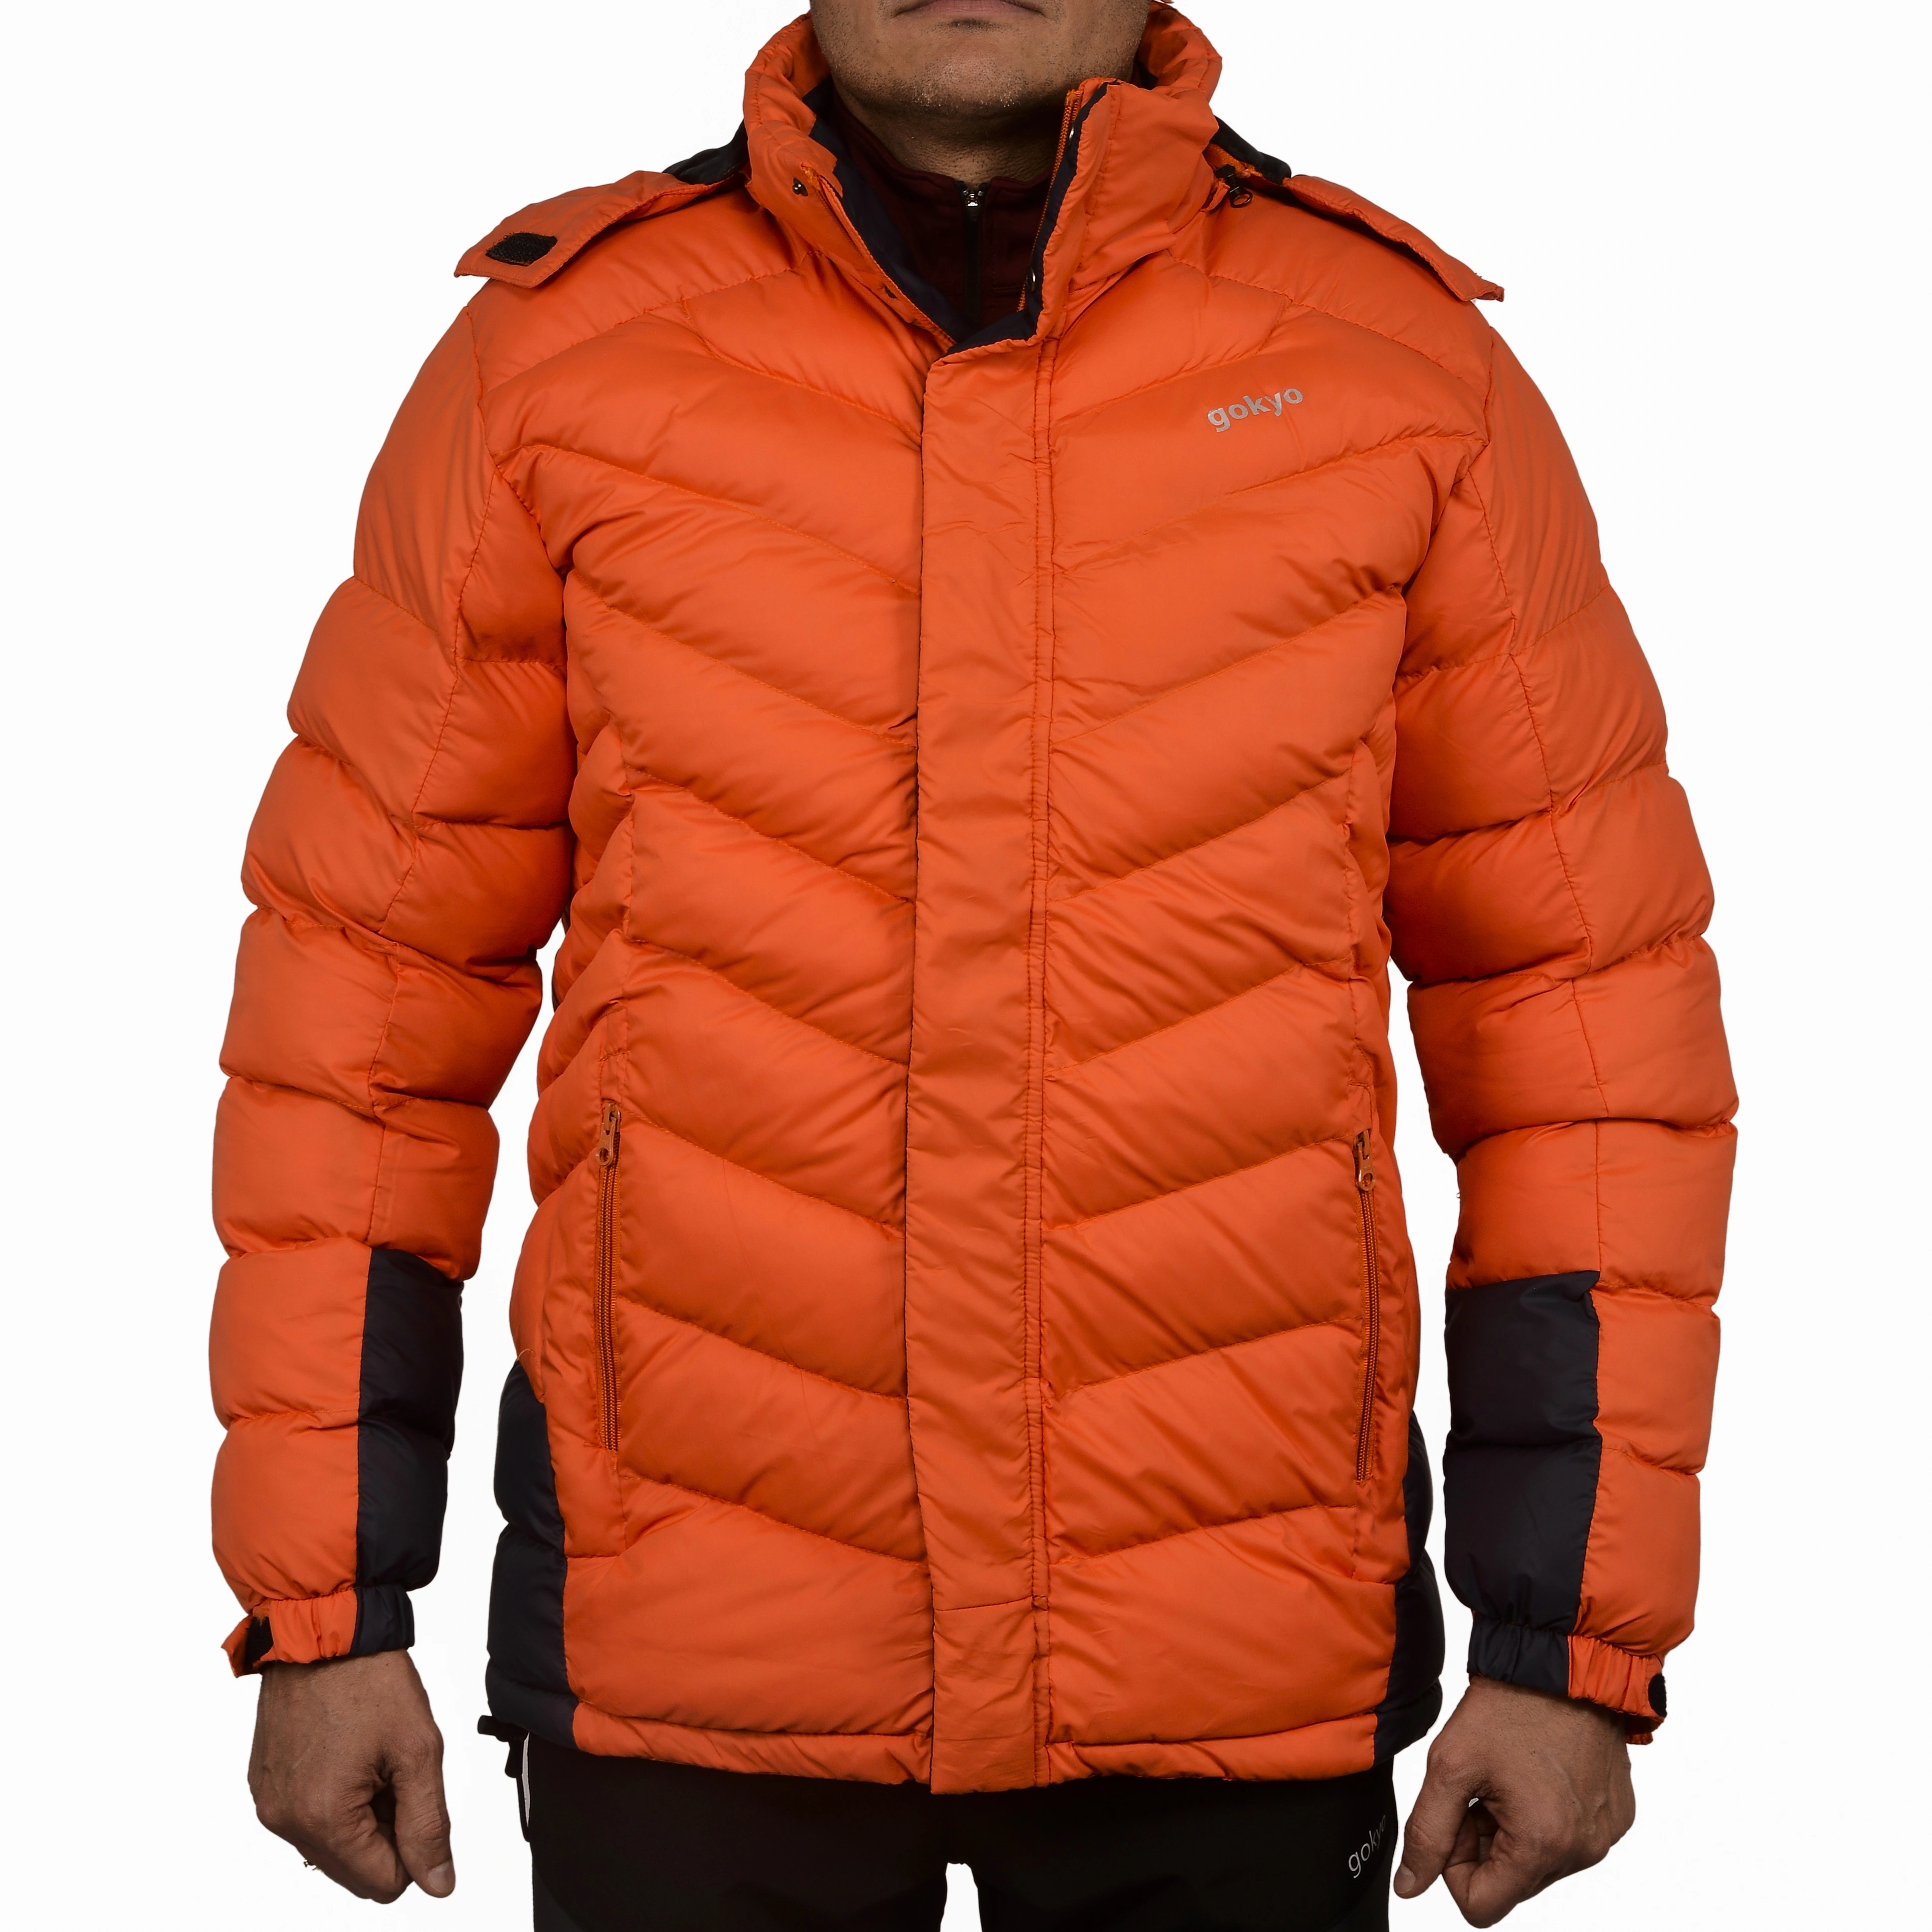 K2 Survivor Down Jacket for Men: Stylized Functionality for Extreme Cold Weather Expeditions (Up to -20°C)-230104